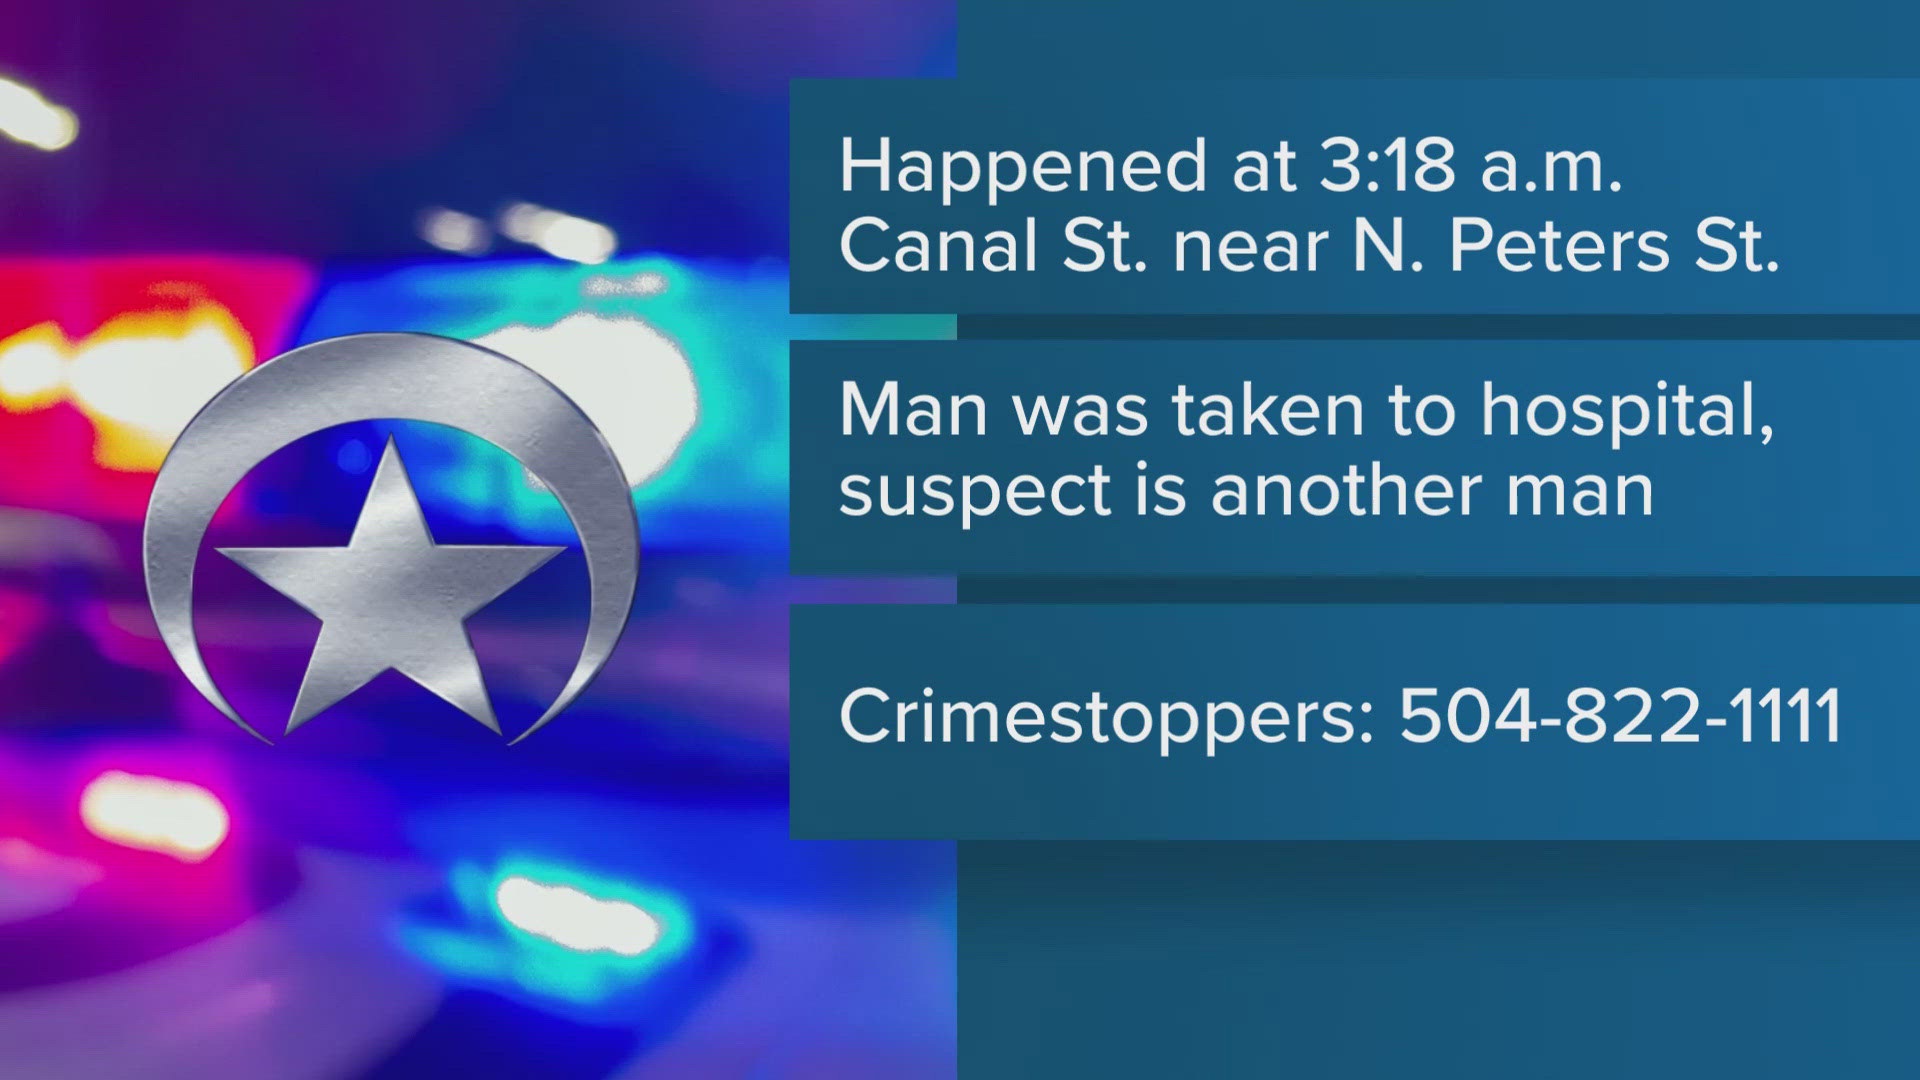 NOPD said it happened on Canal Street near North Peters Street around 3:18 a.m. Saturday.